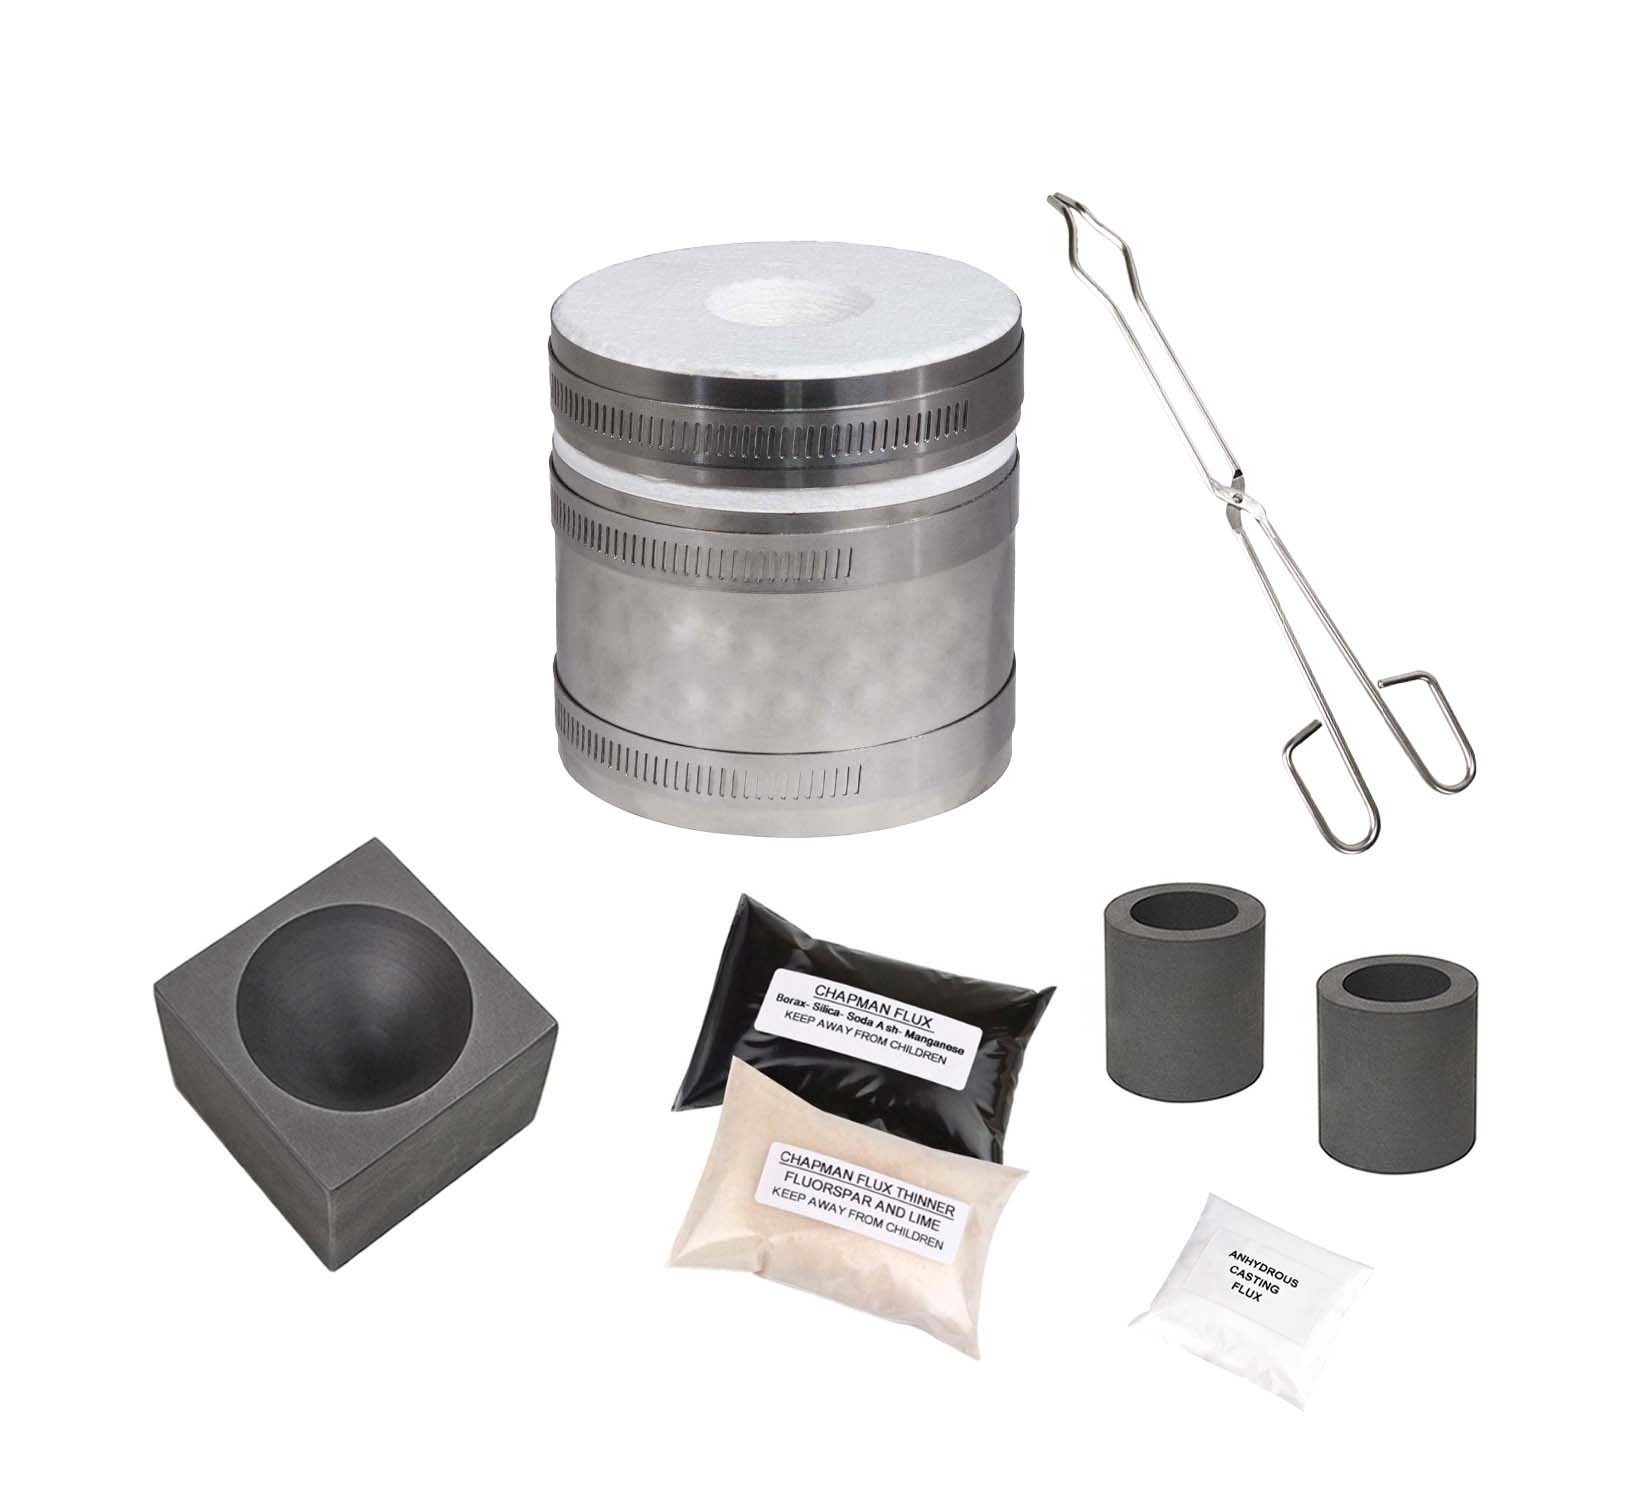 Deluxe Mini Pro Kiln Propane Assay Smelting Flux Furnace Kit with Single Cavity Graphite Conical Mold & Accessories